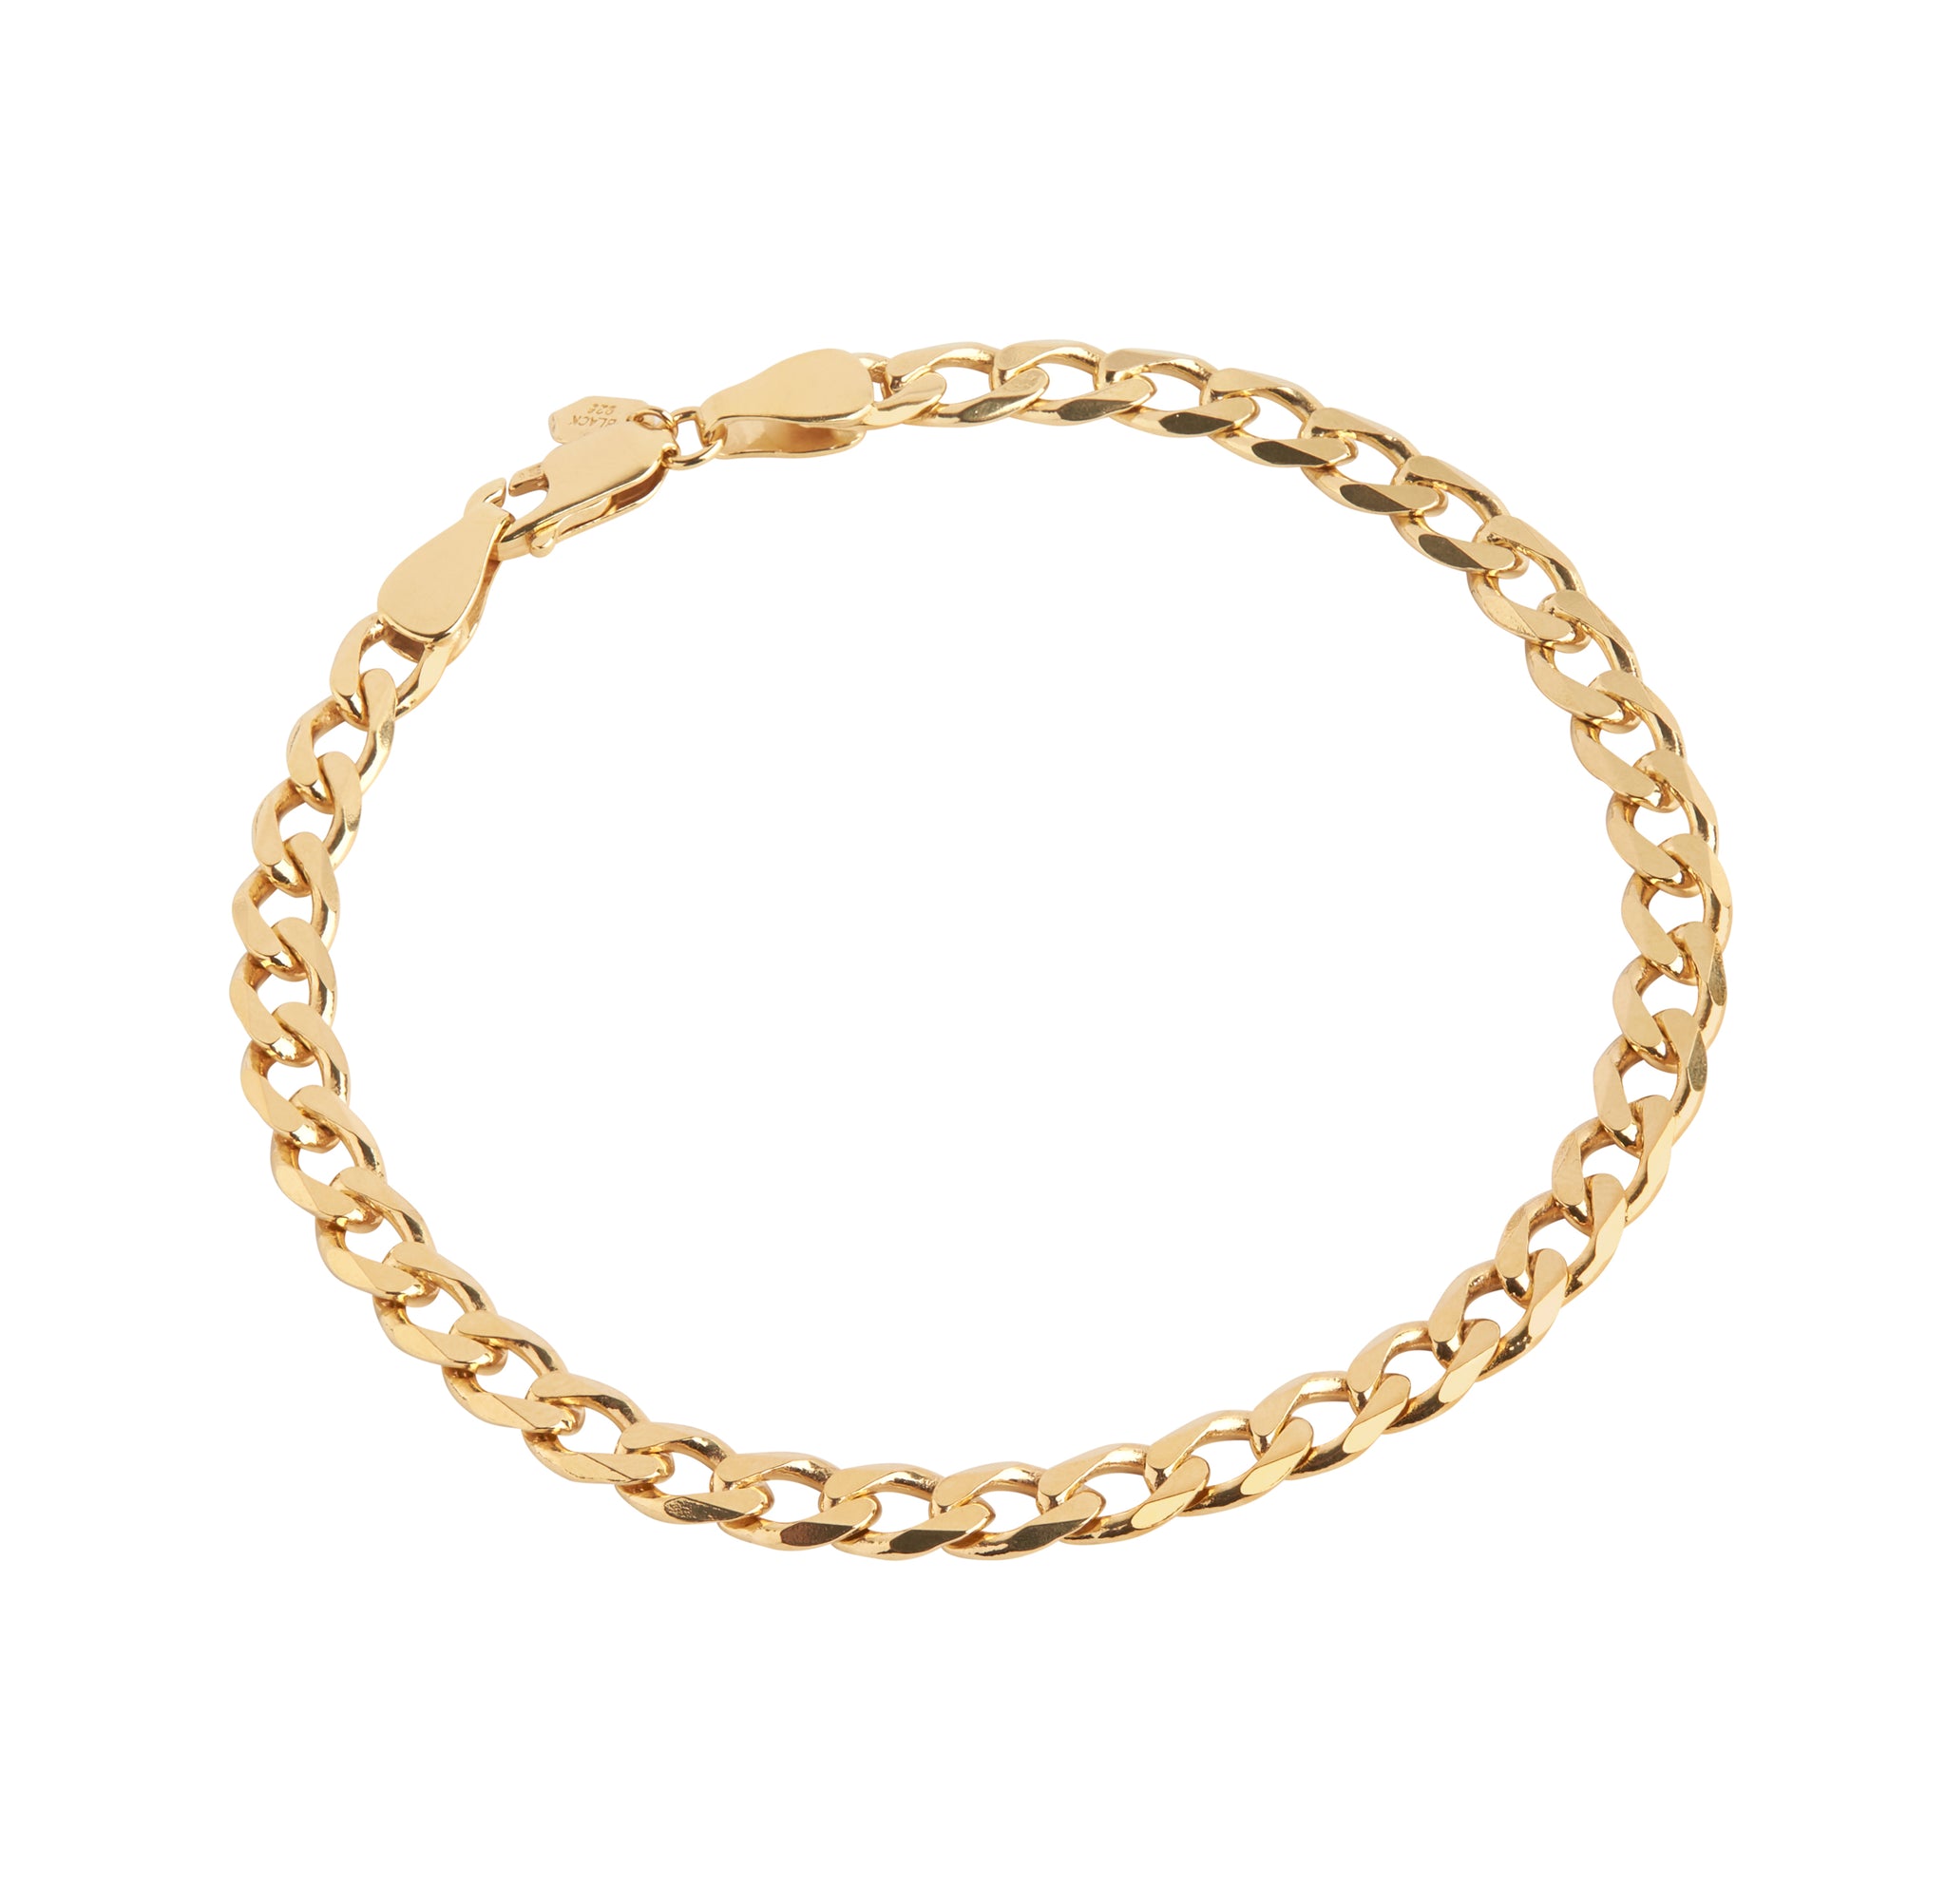 FORZA BRACELET IN GOLD BY MARIA BLACK